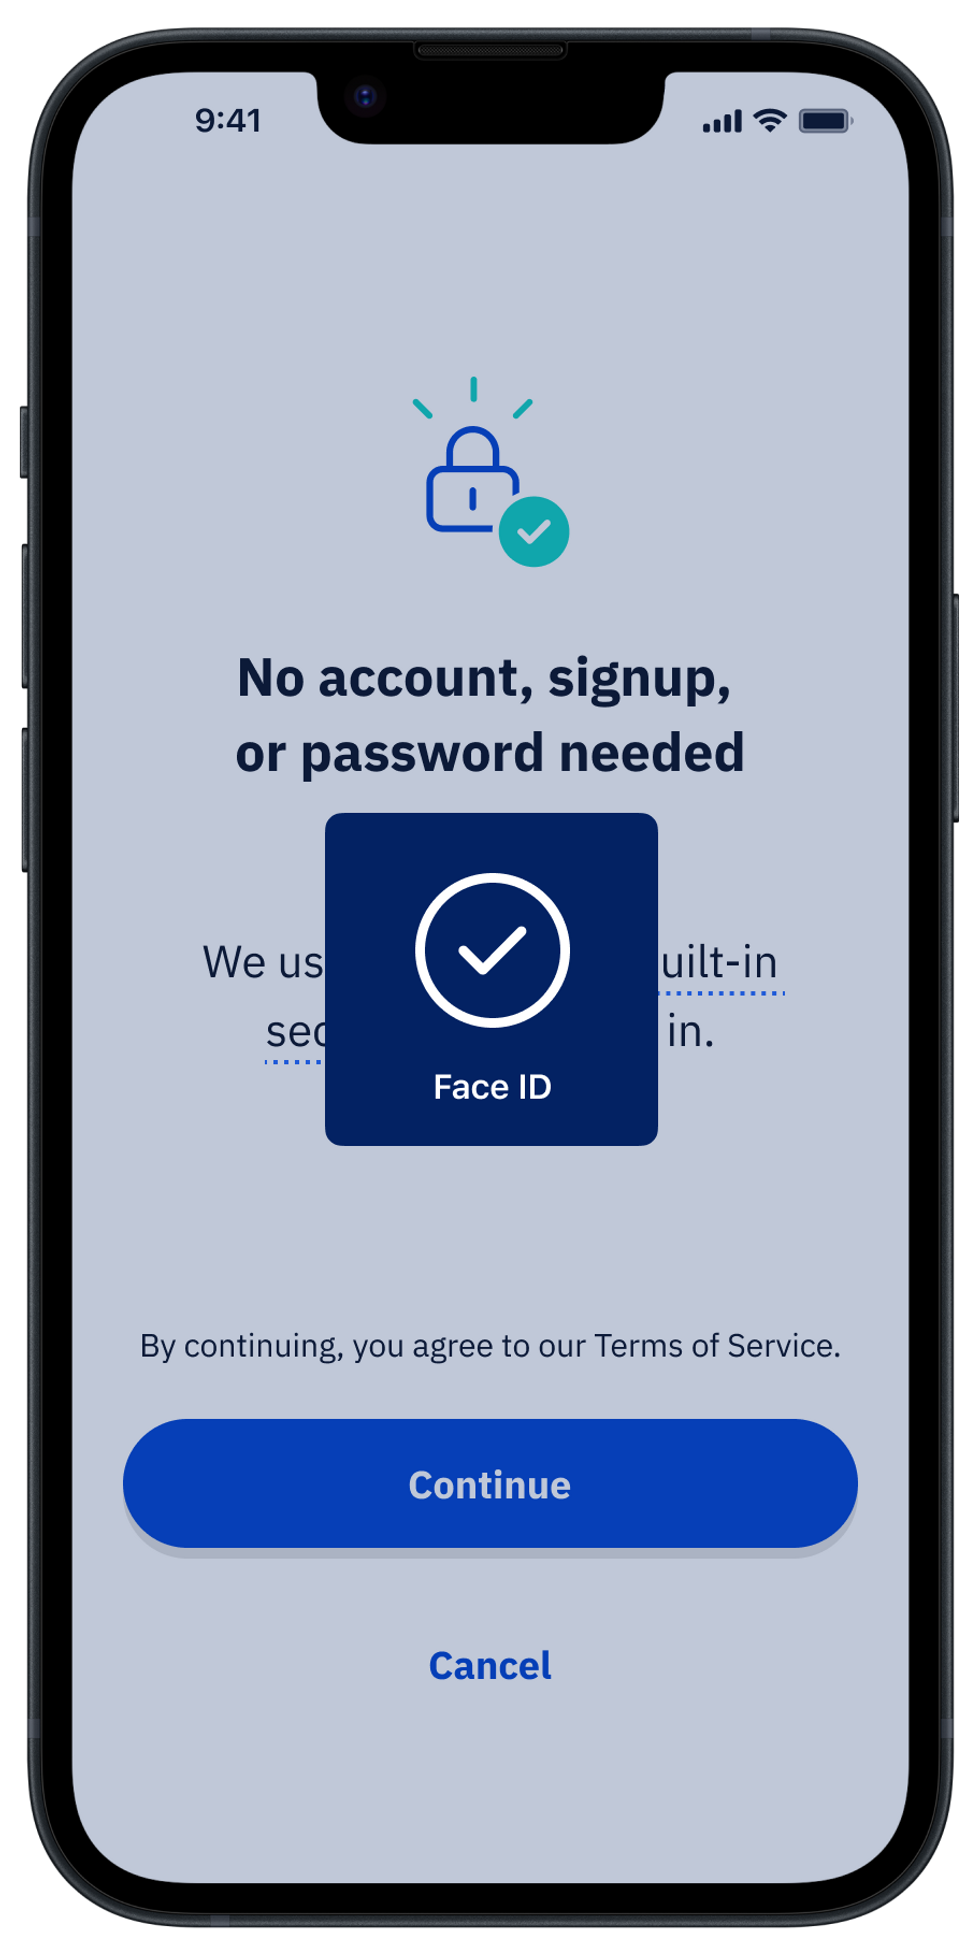 \u200b"Sign in with Face ID" and Terms of Service agreement screen